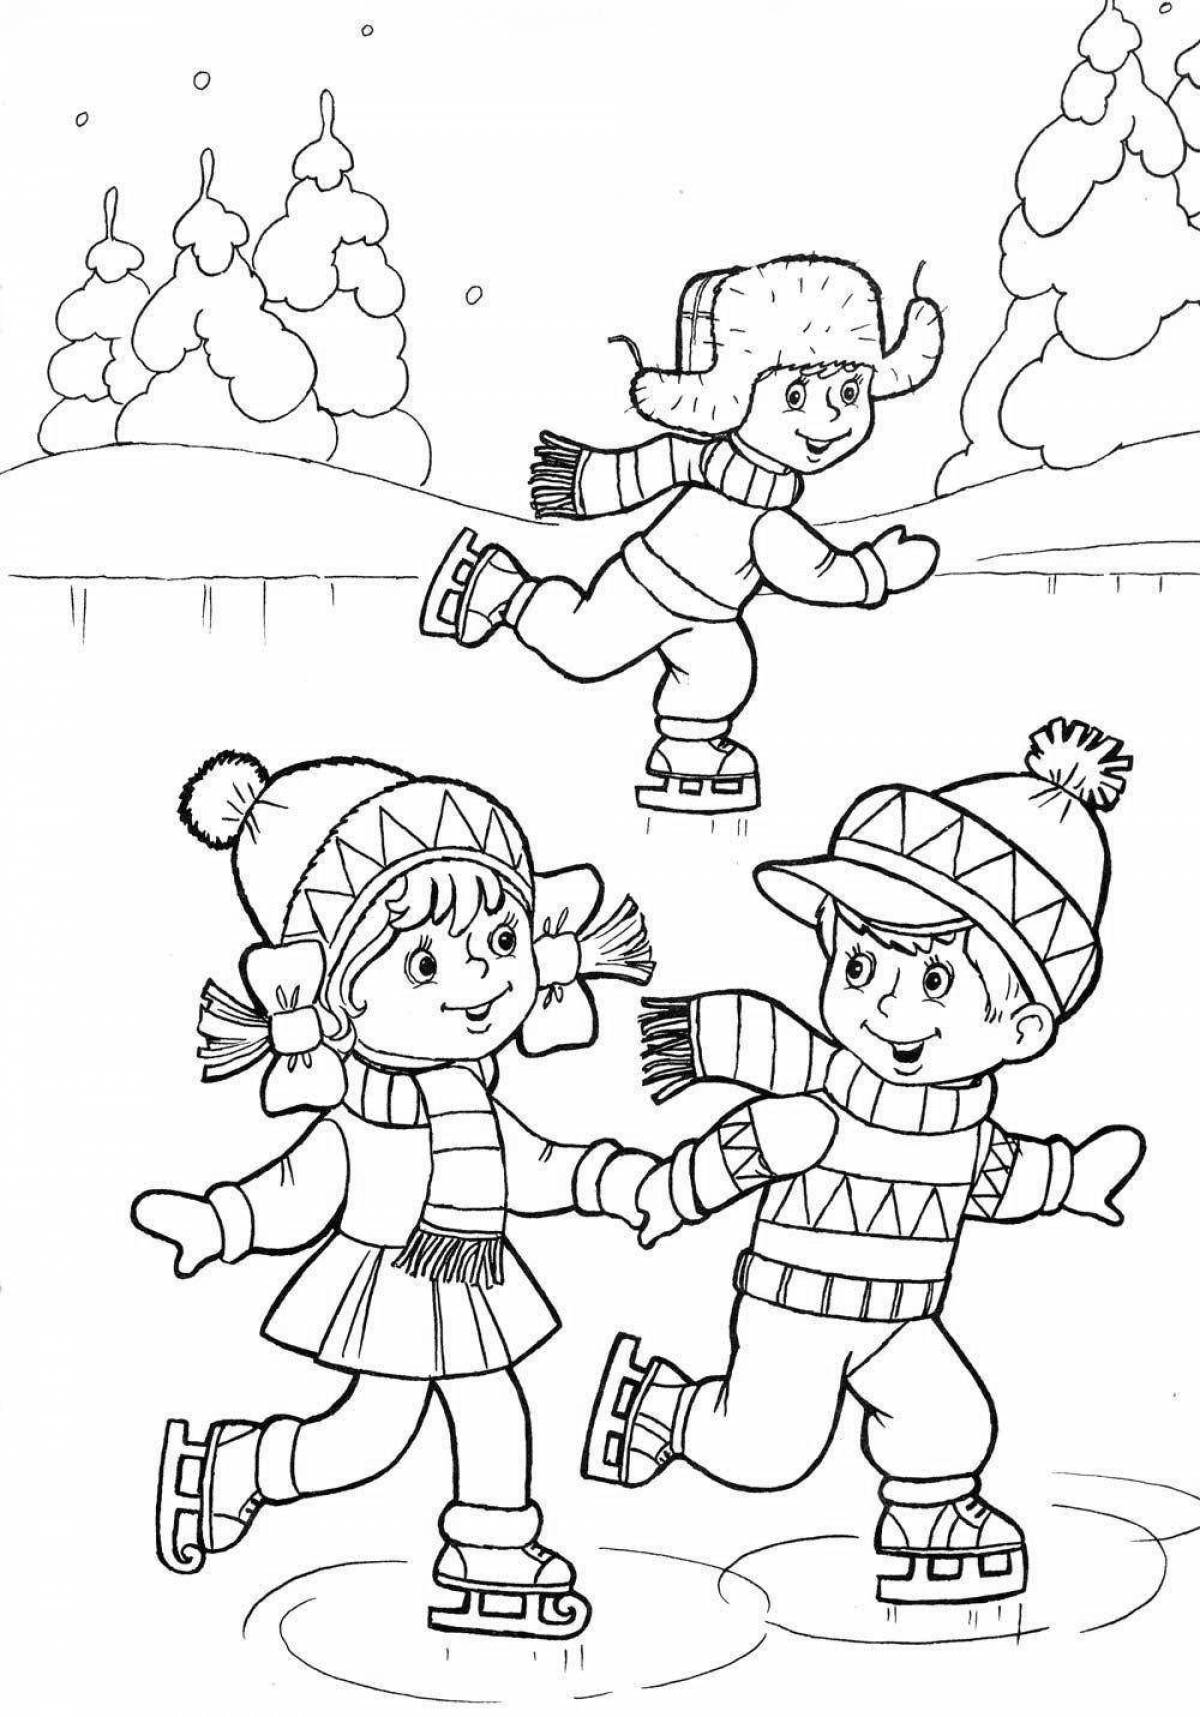 Playful coloring of winter holidays